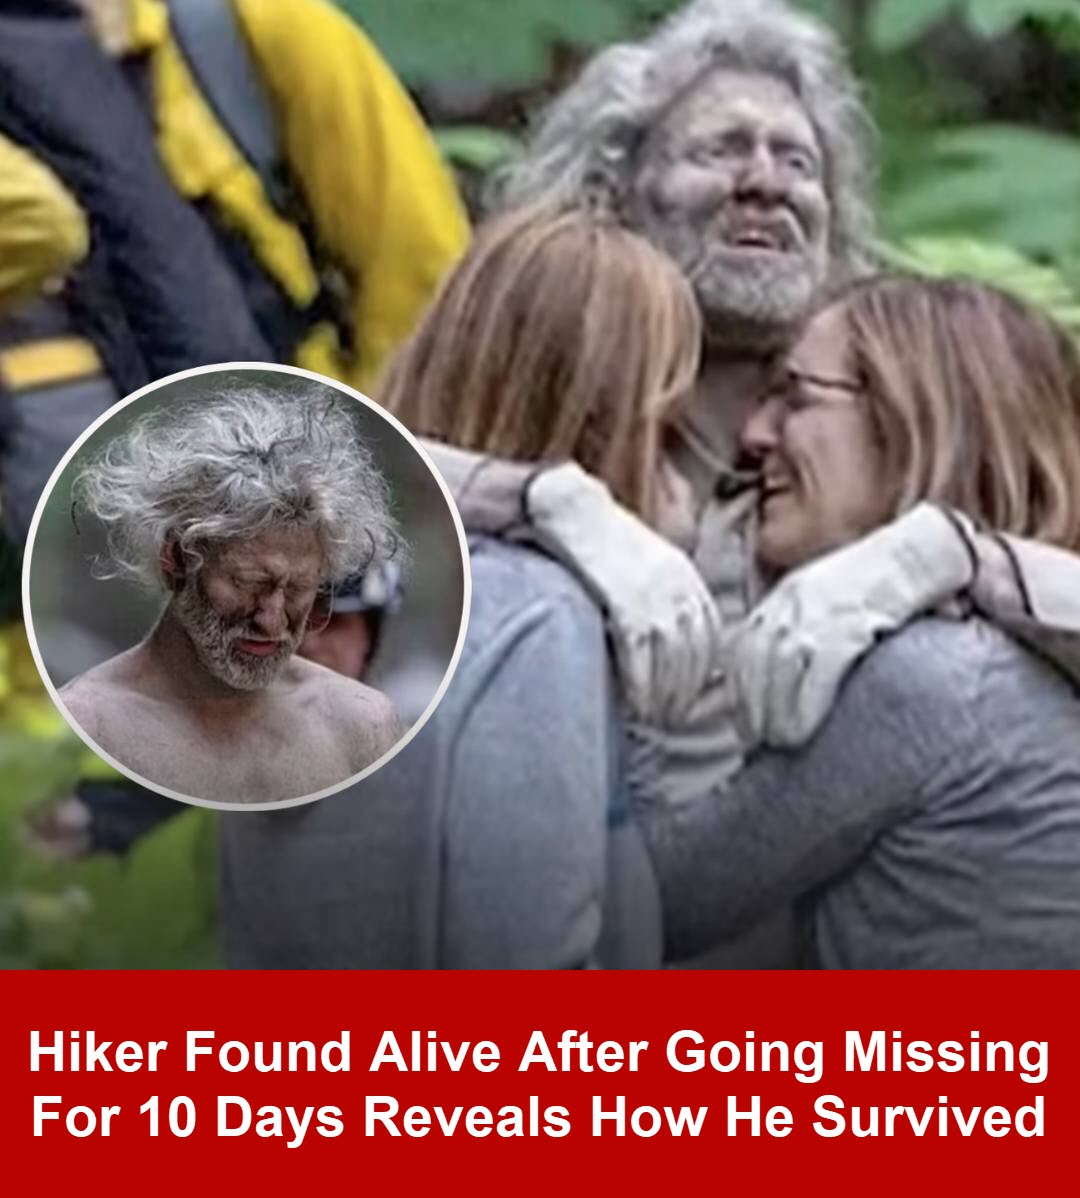 He was stranded in the mountains of northern California. Check the comments